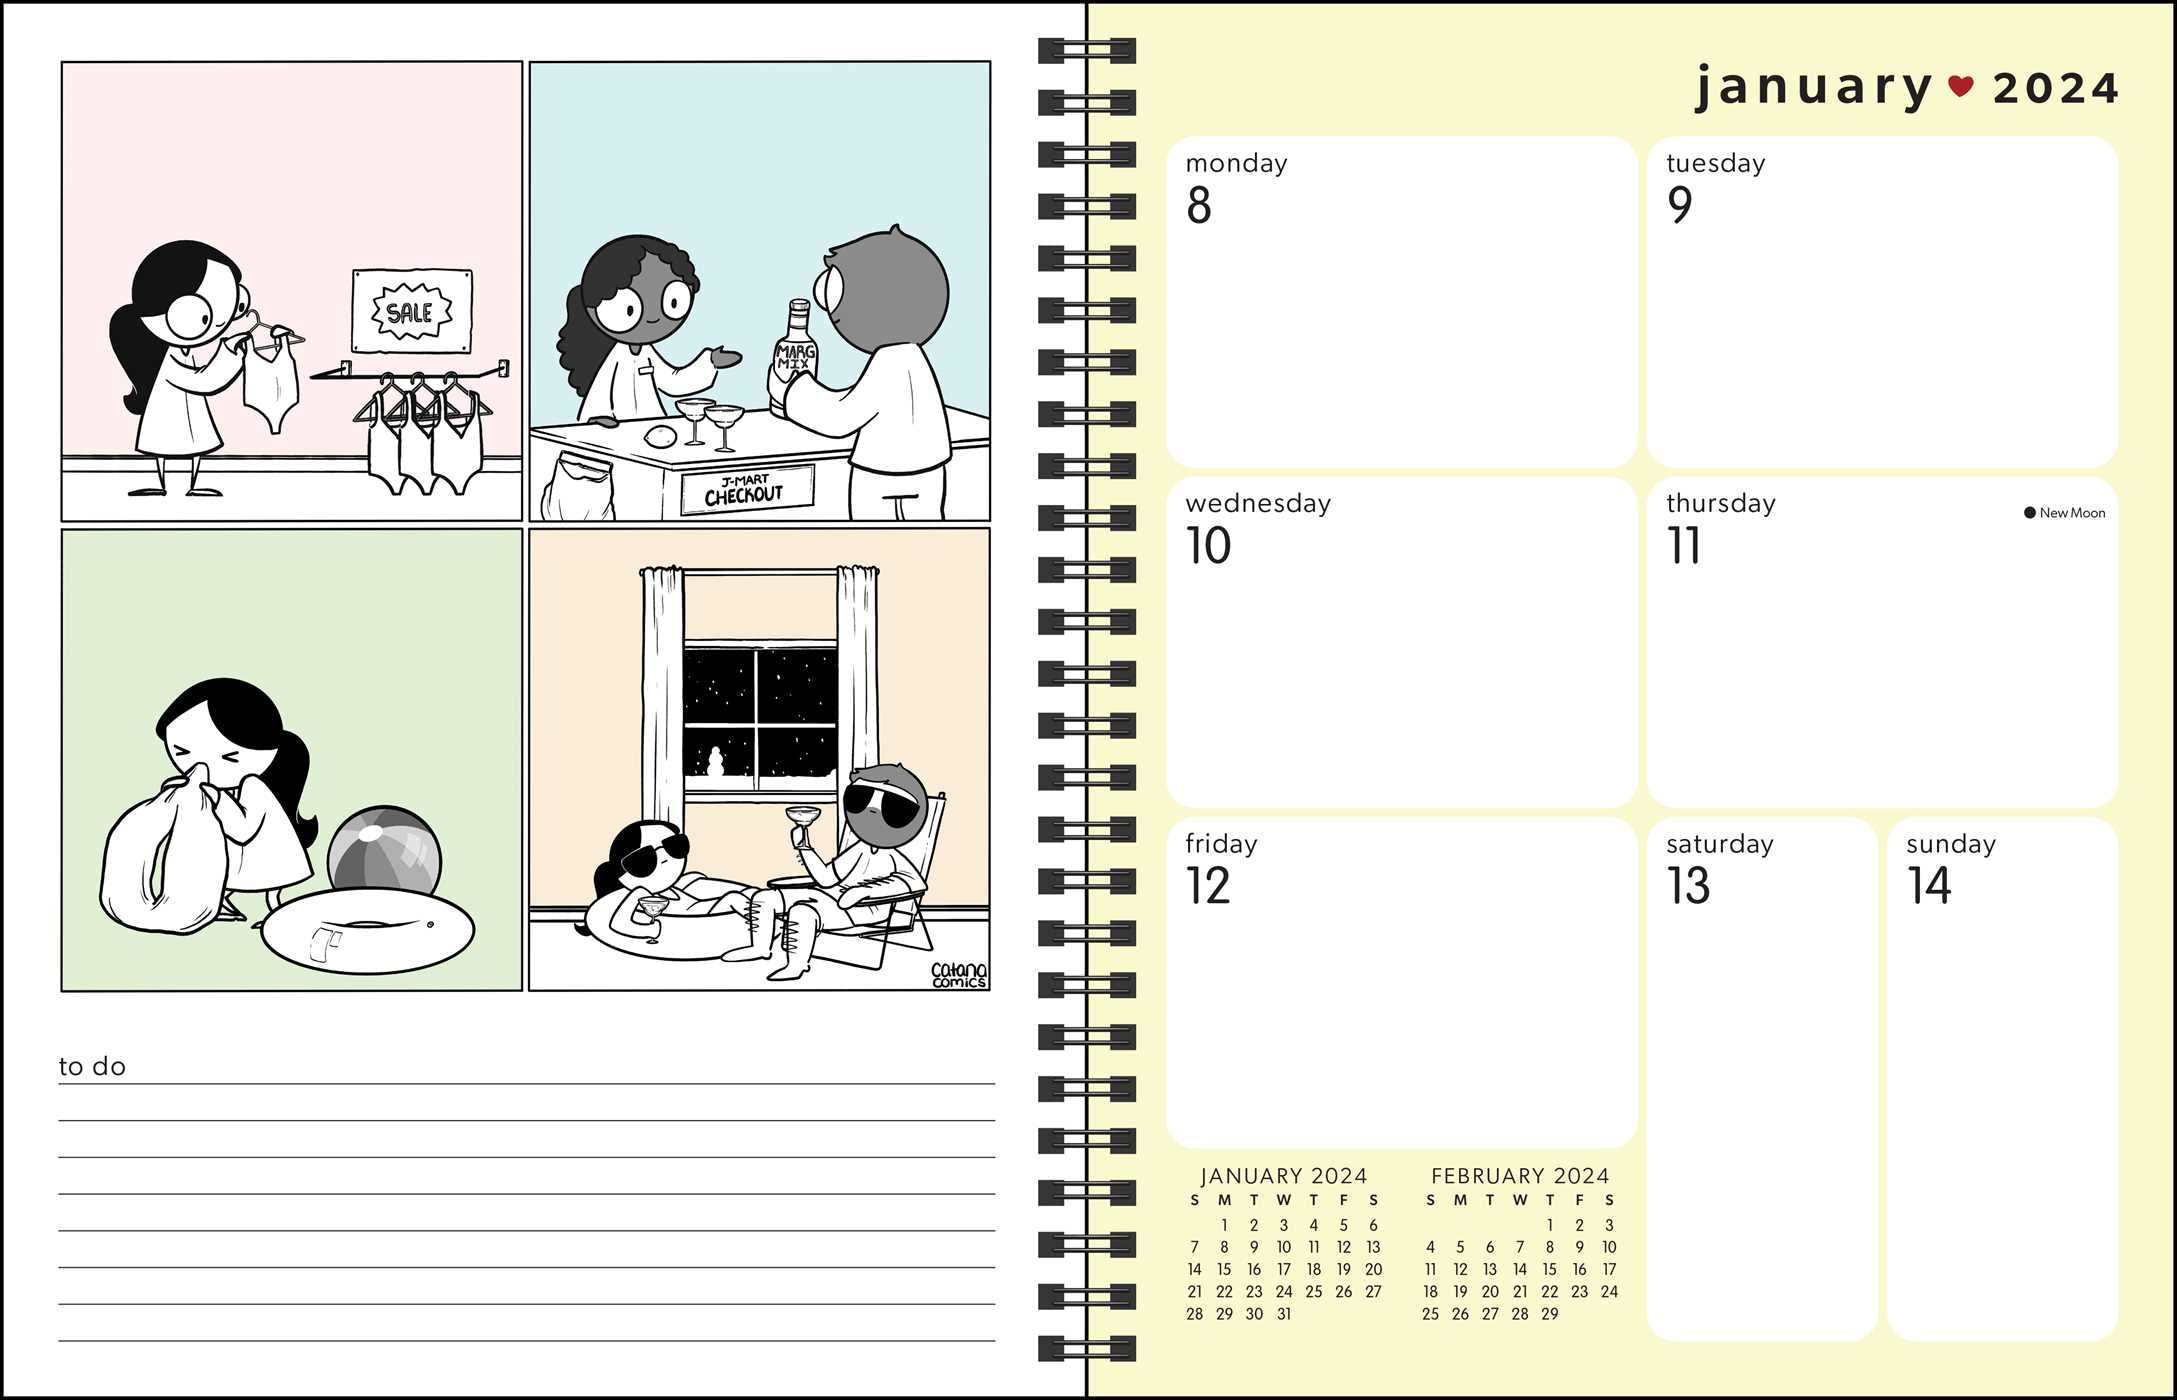 Catana Comics: Little Moments of Love 16-Month 2023-2024 Weekly/Monthly Planner